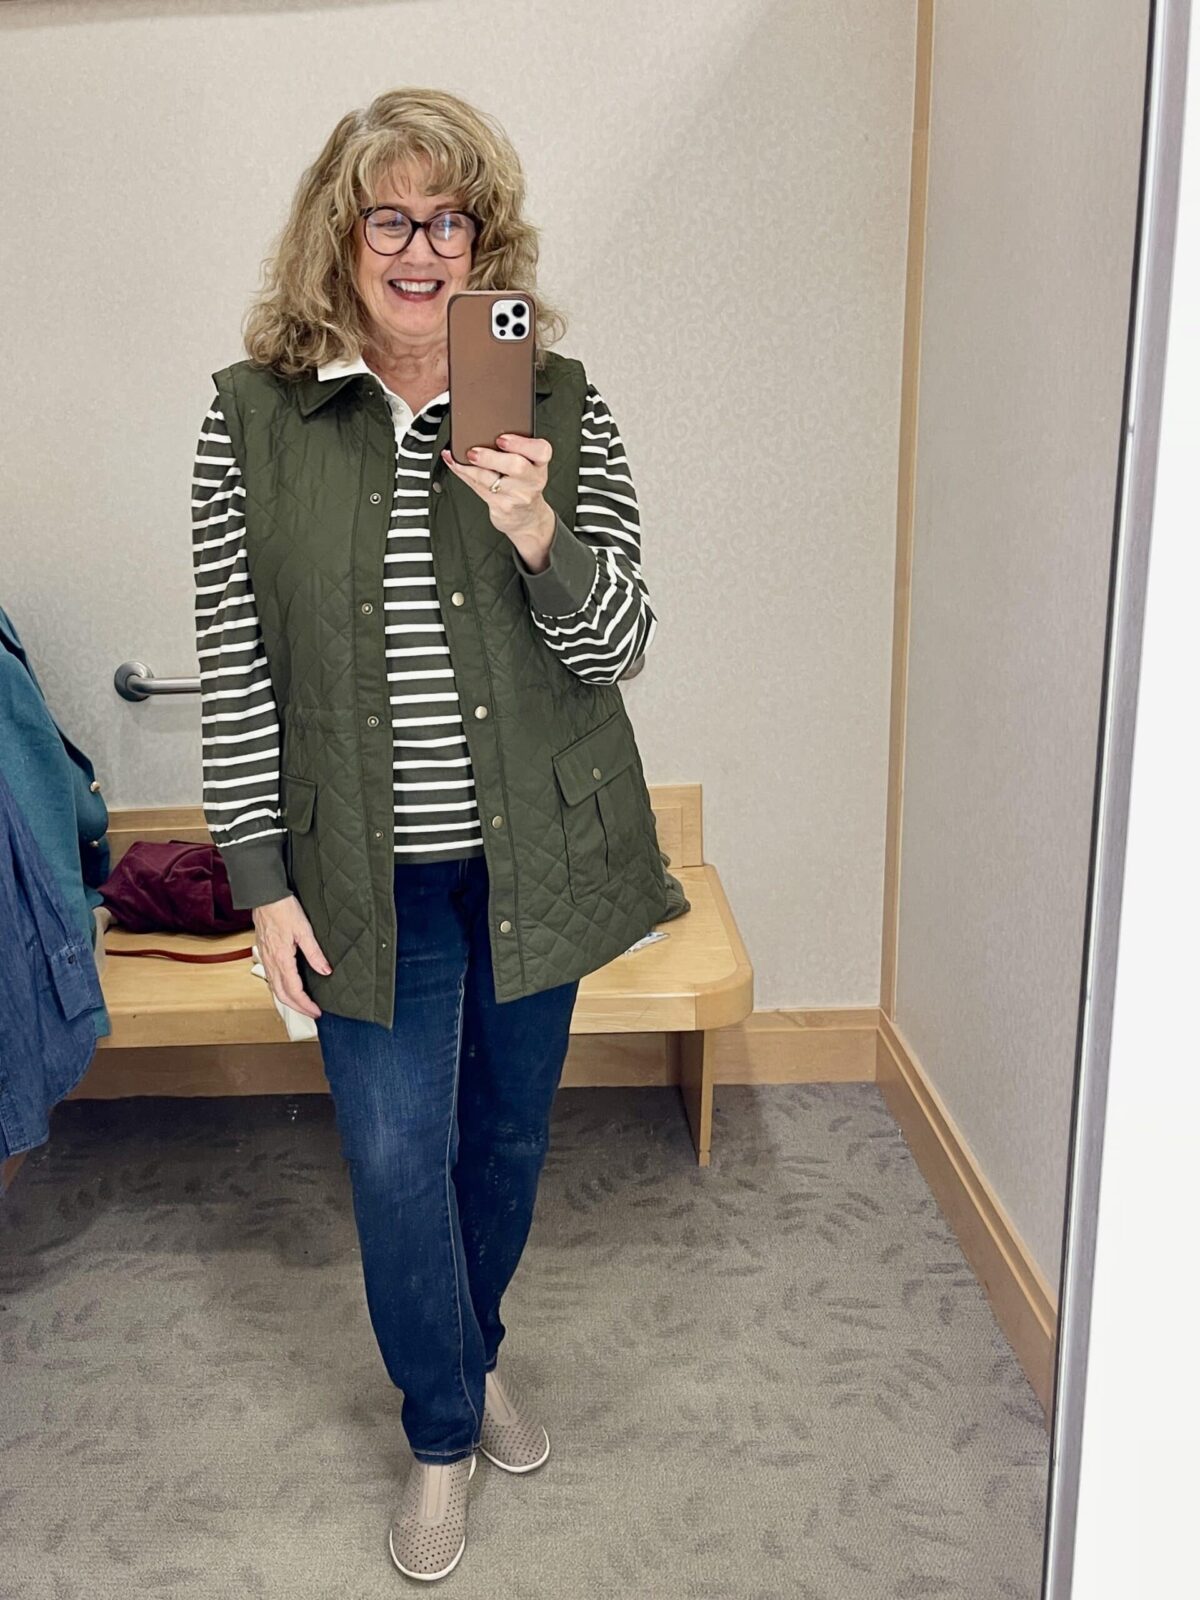 Talbots 75th Anniversary Sale with Leigh & Me | Over 50 Feeling 40